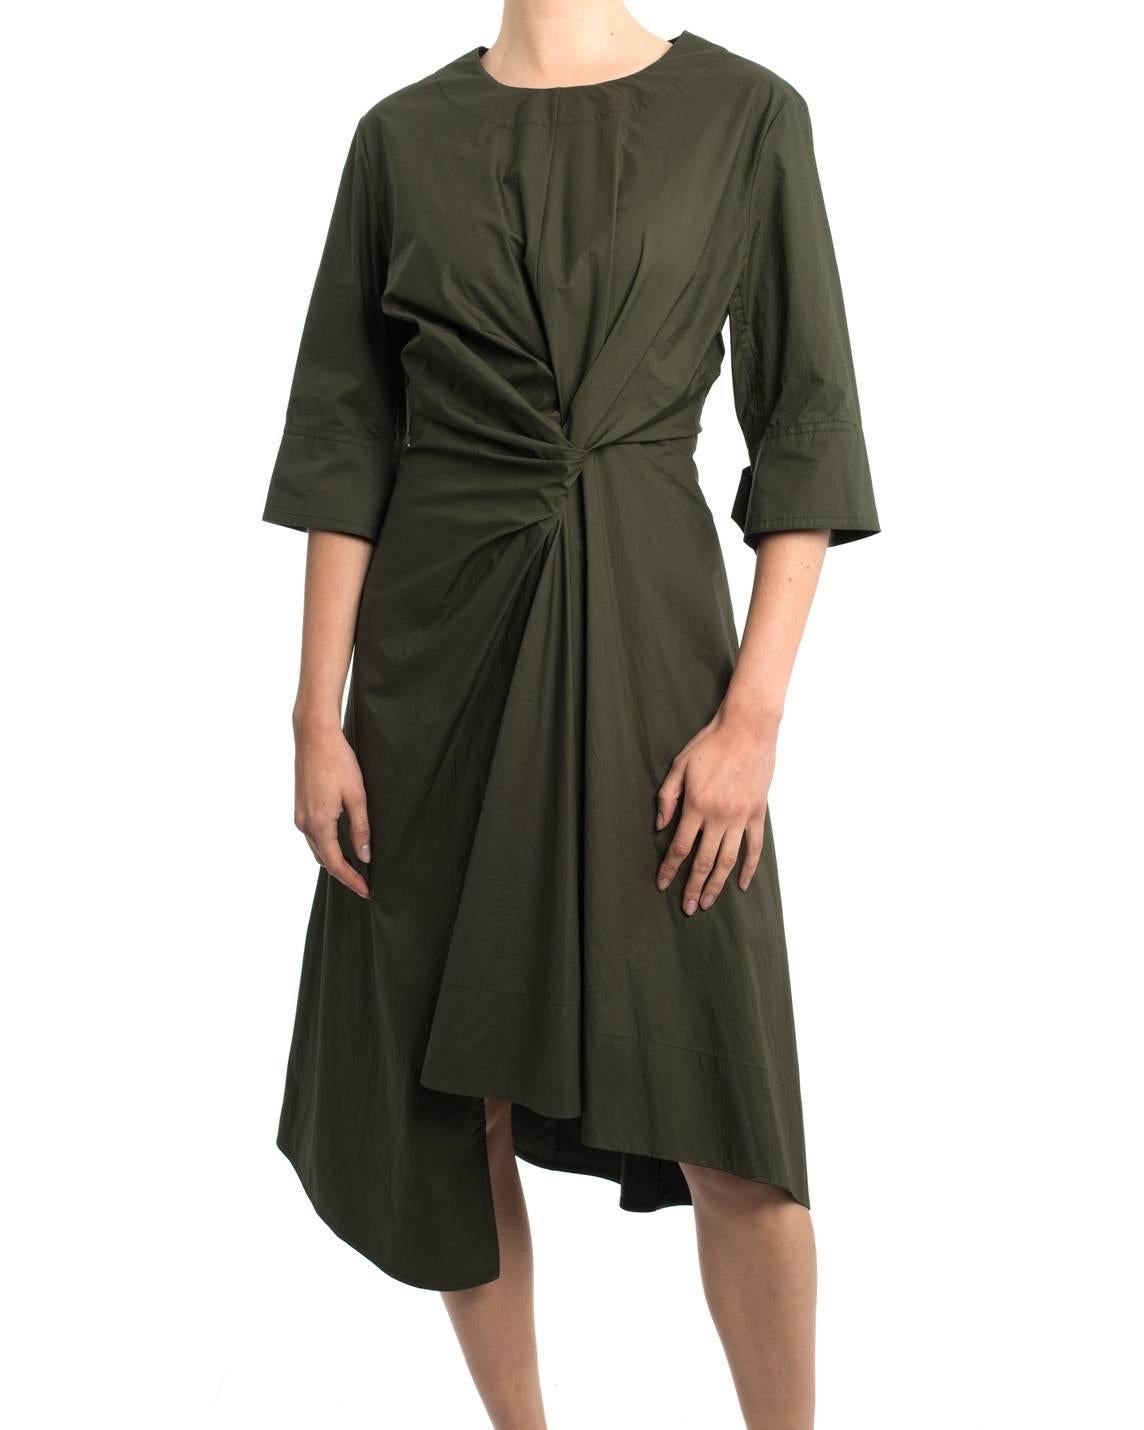 Marni olive green cotton knotted dress with asymetrical hem. Rounded neckline, ¾ length sleeve, centre back zipper.  Marked size IT44 (USA 8).  Garment to fit 35” bust, garment waist 30”,  garment hip is semi-full and recommended for about 38-39”